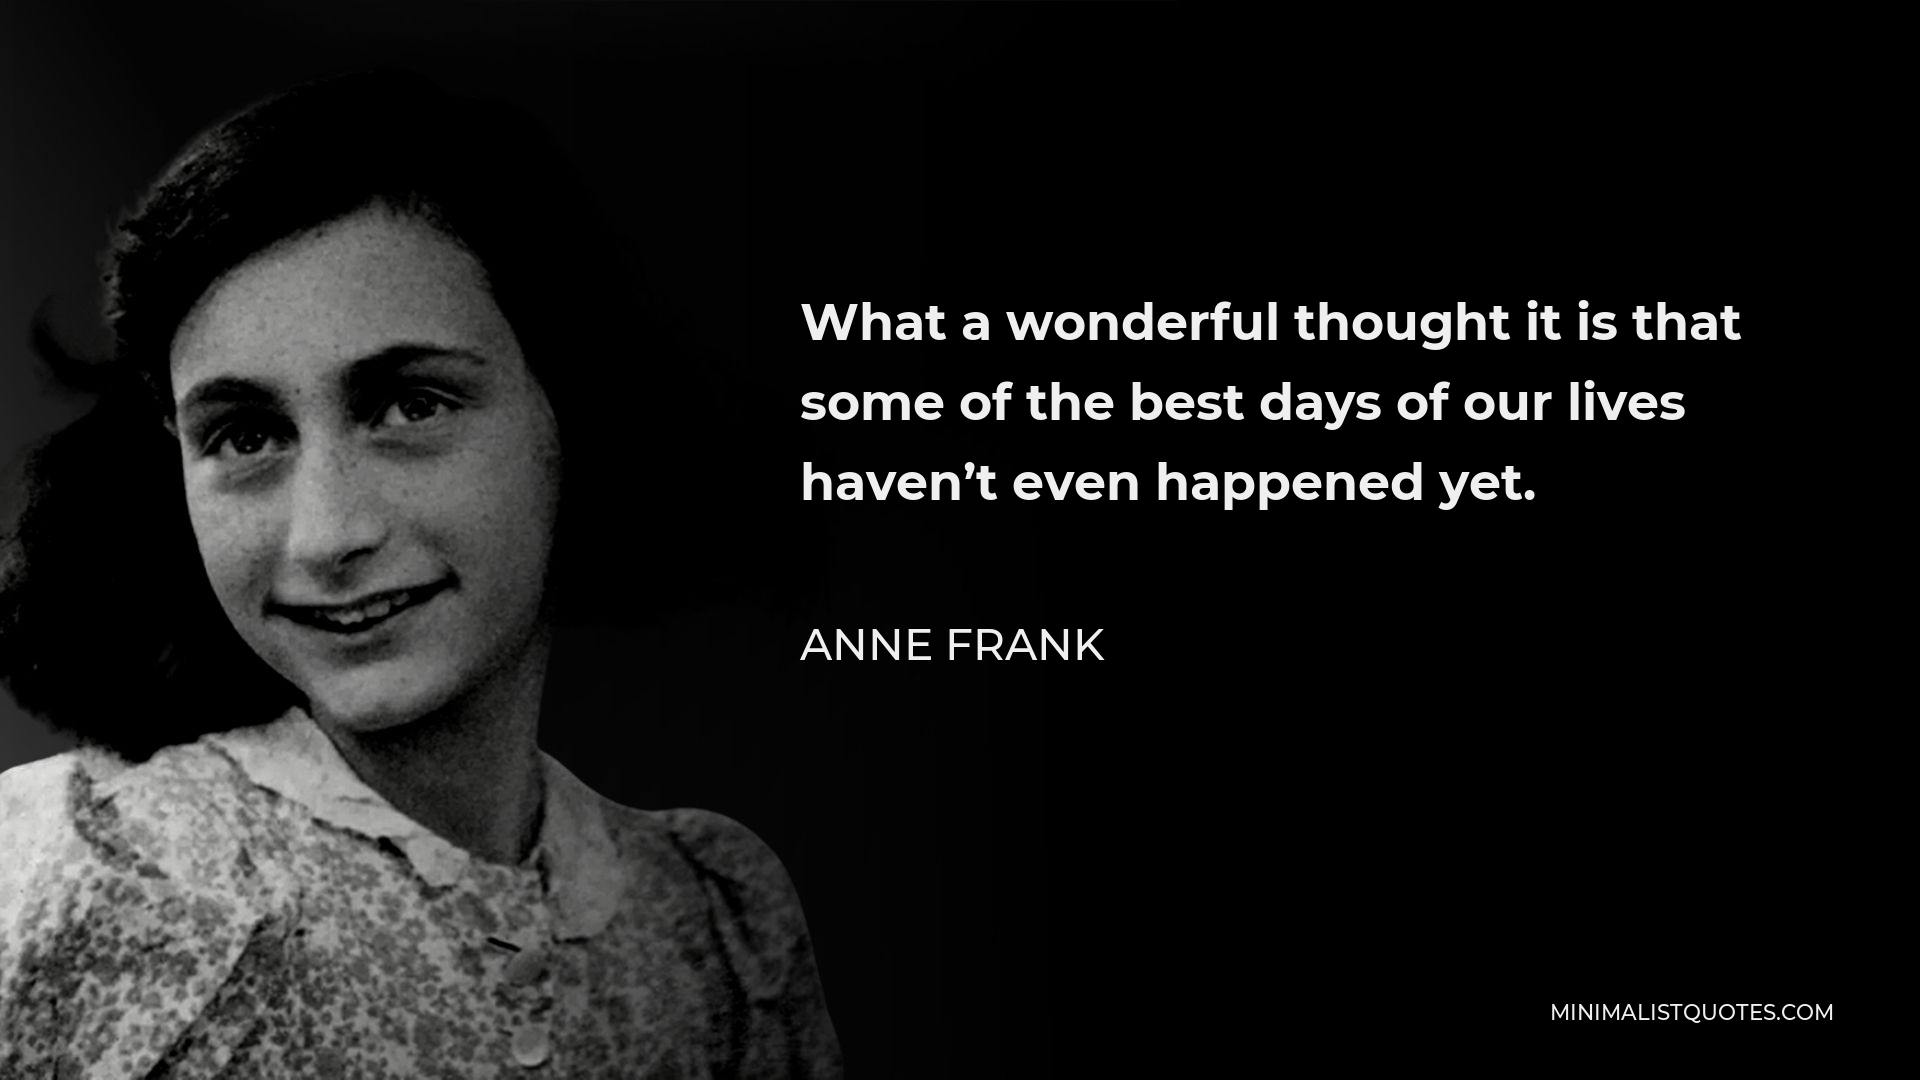 Anne Frank Quote - What a wonderful thought it is that some of the best days of our lives haven’t even happened yet.